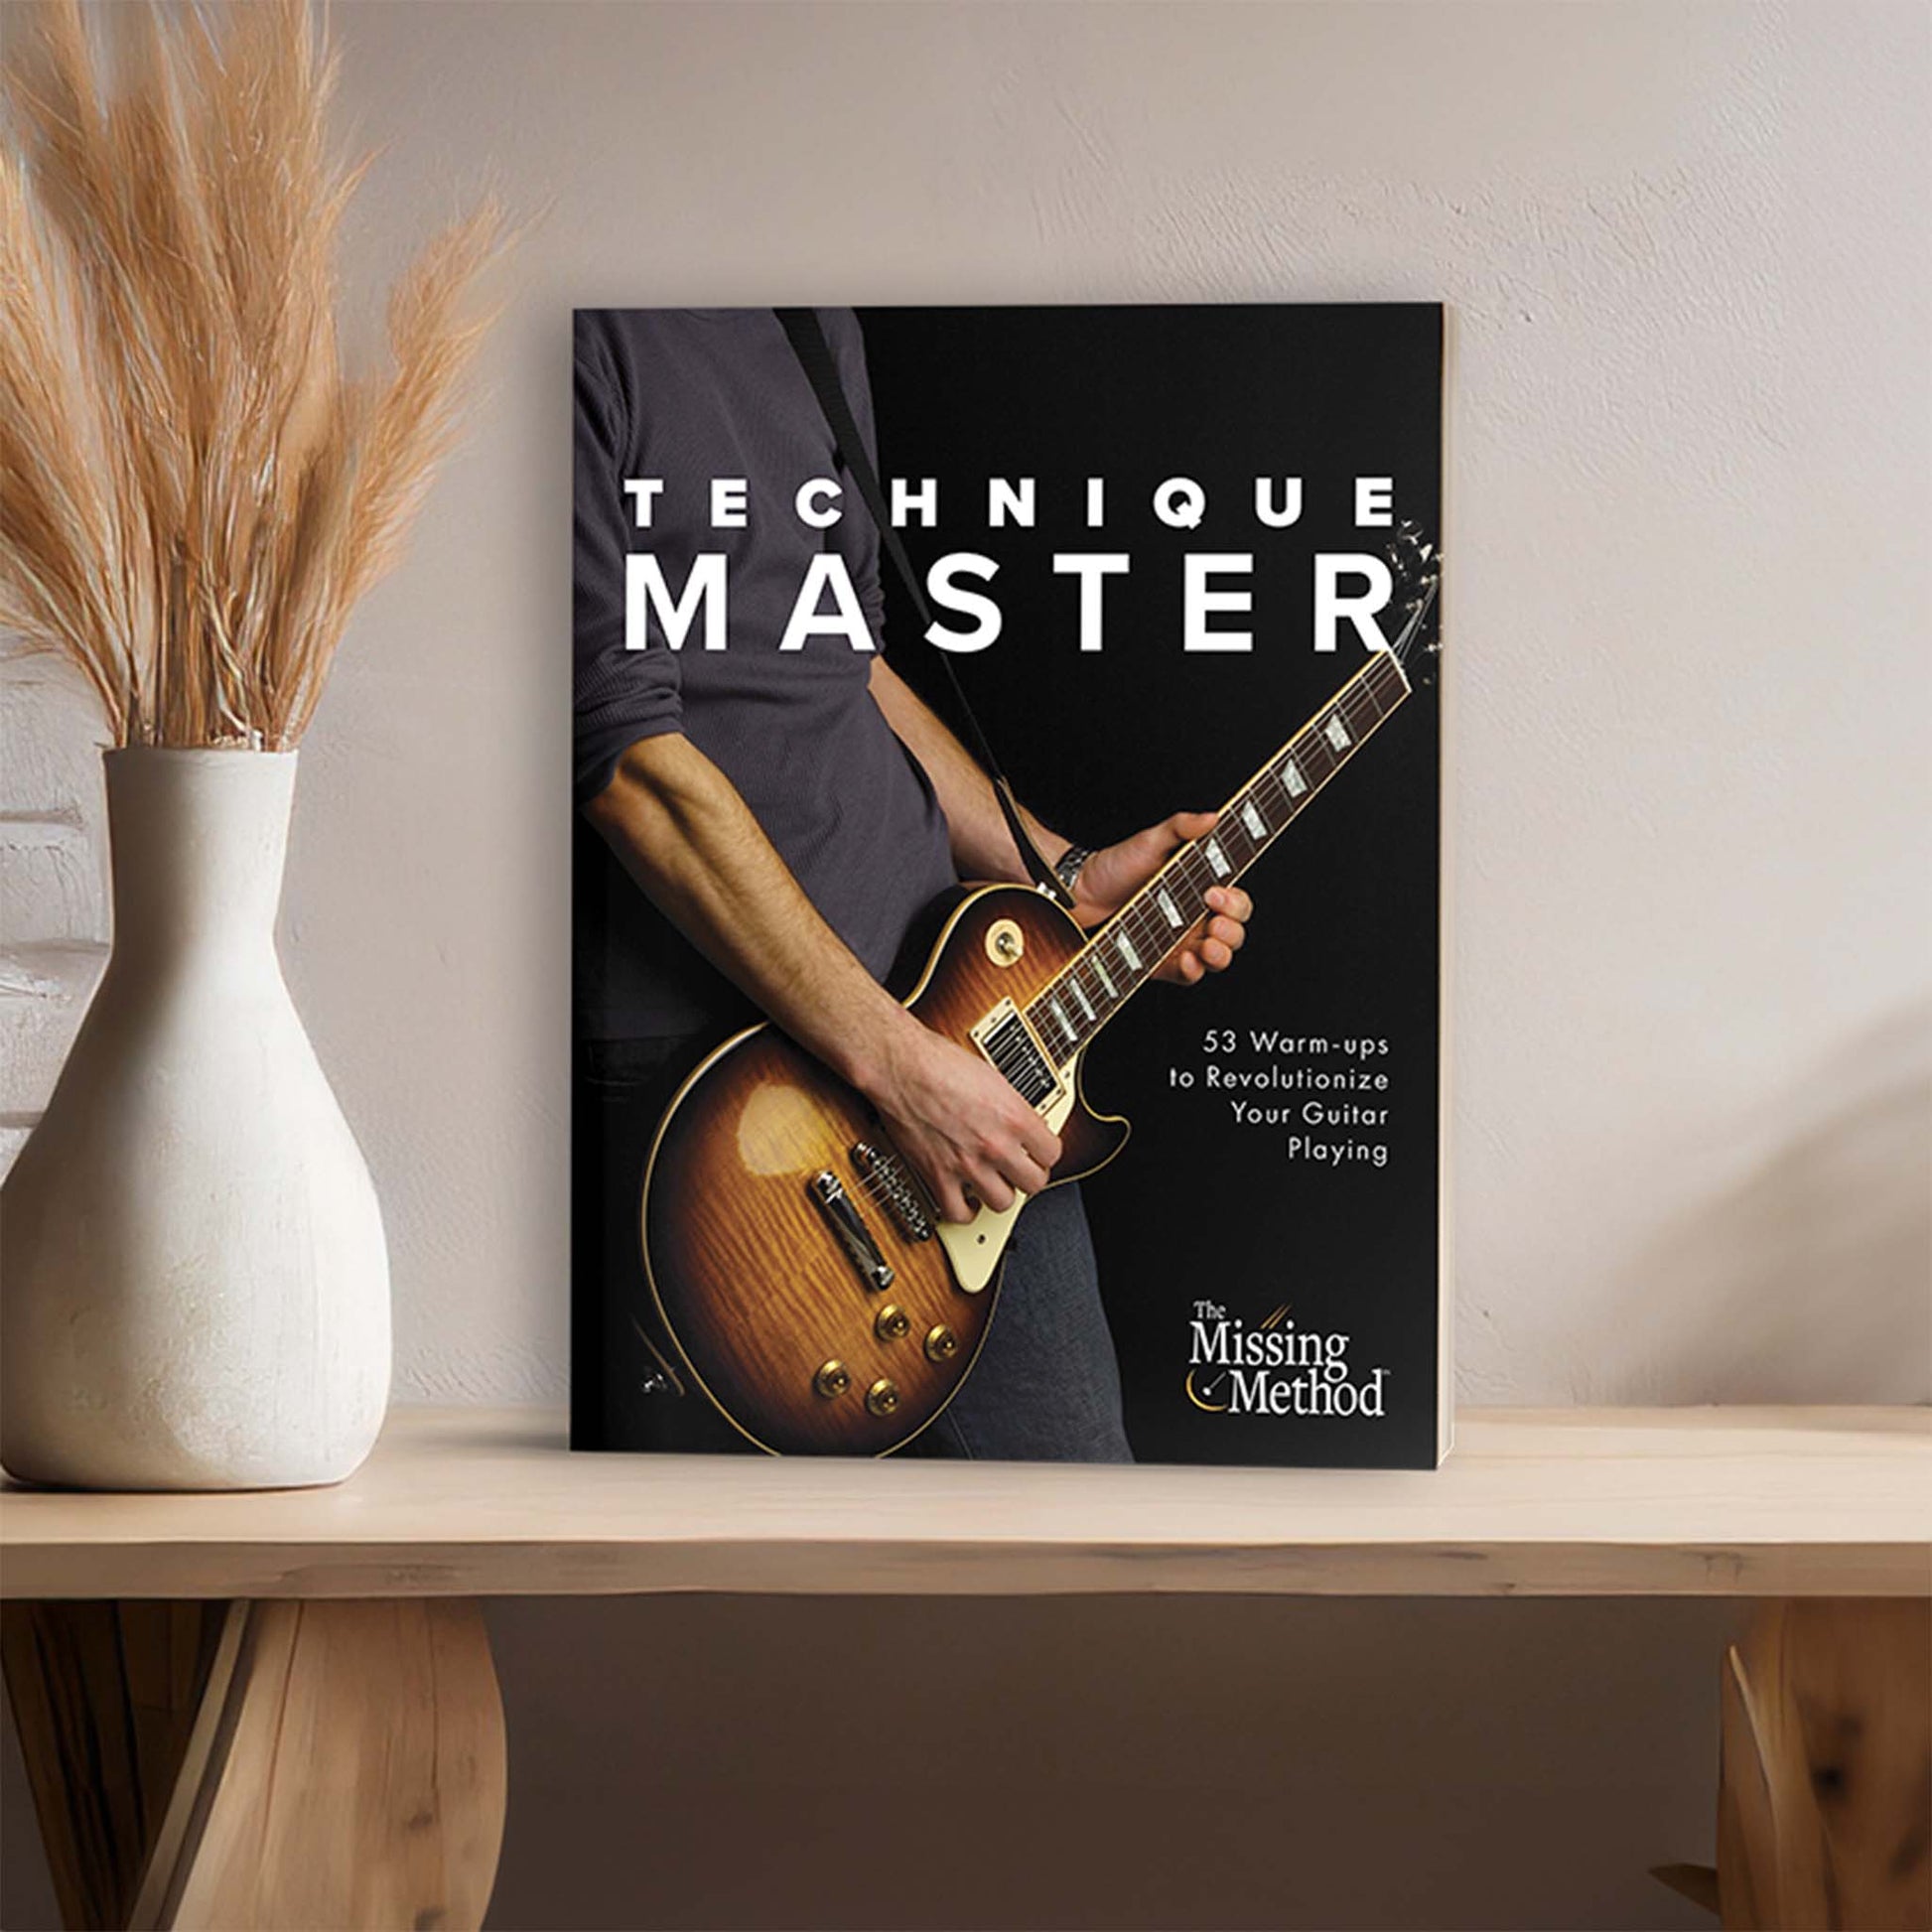 Technique Master from The Missing Method for Guitar. Image of book on shelf next to home to decor.